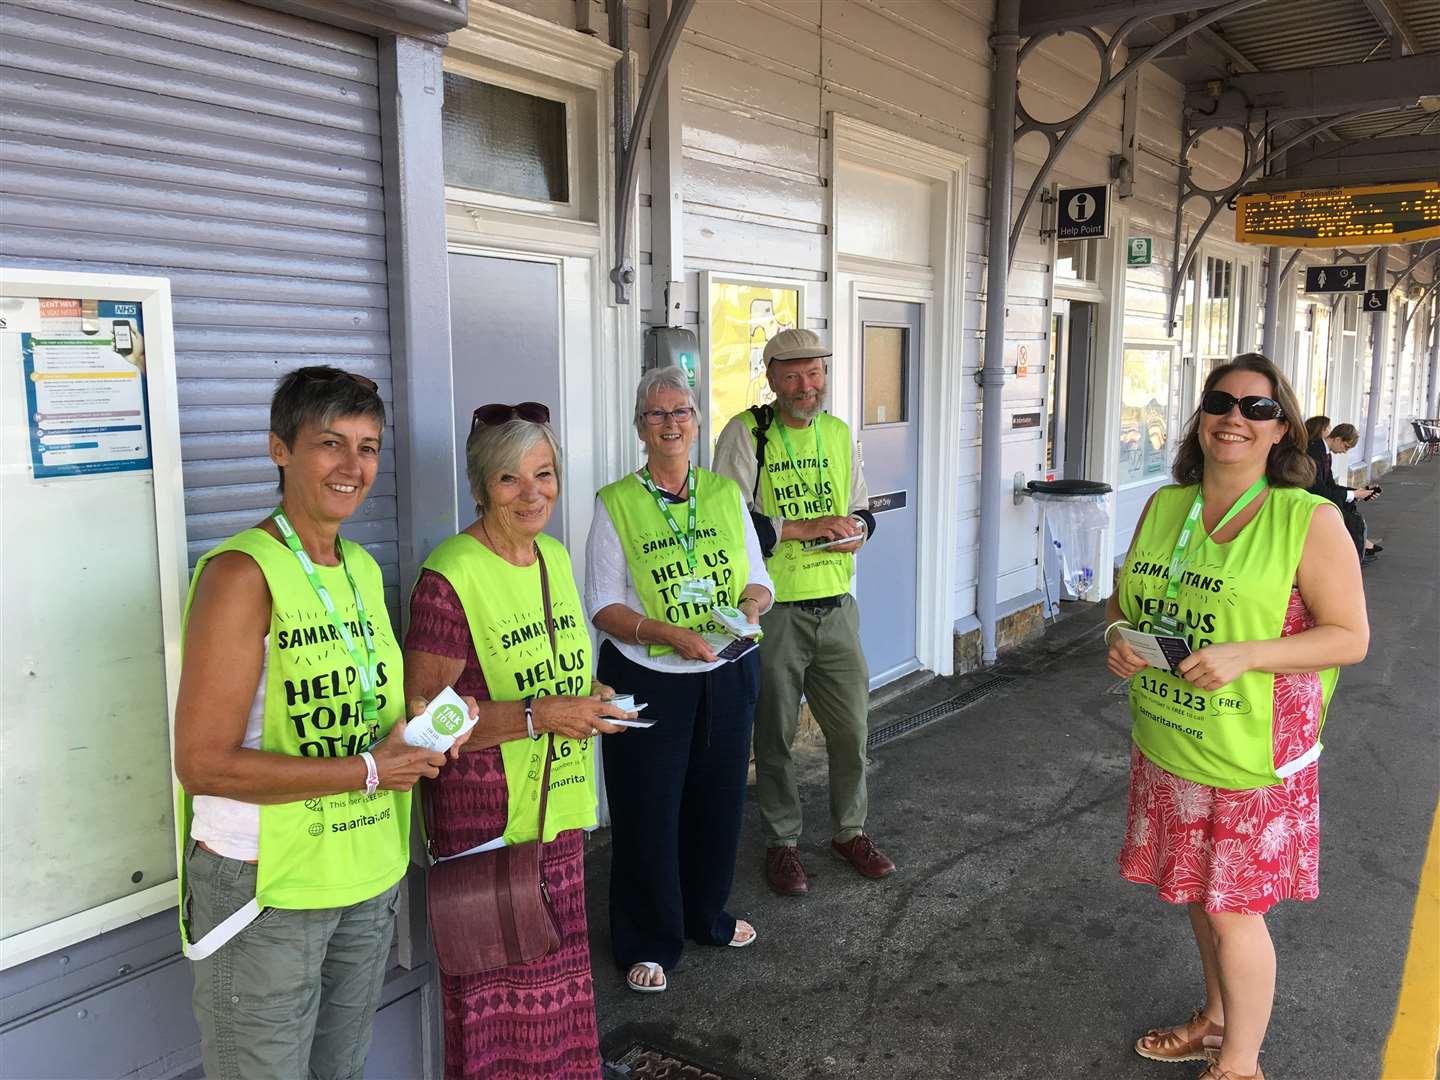 Volunteers from Maidstone Samaritans gathered at Maidstone East on Tuesday July 24 to give advice on listening to commuters. (3223723)